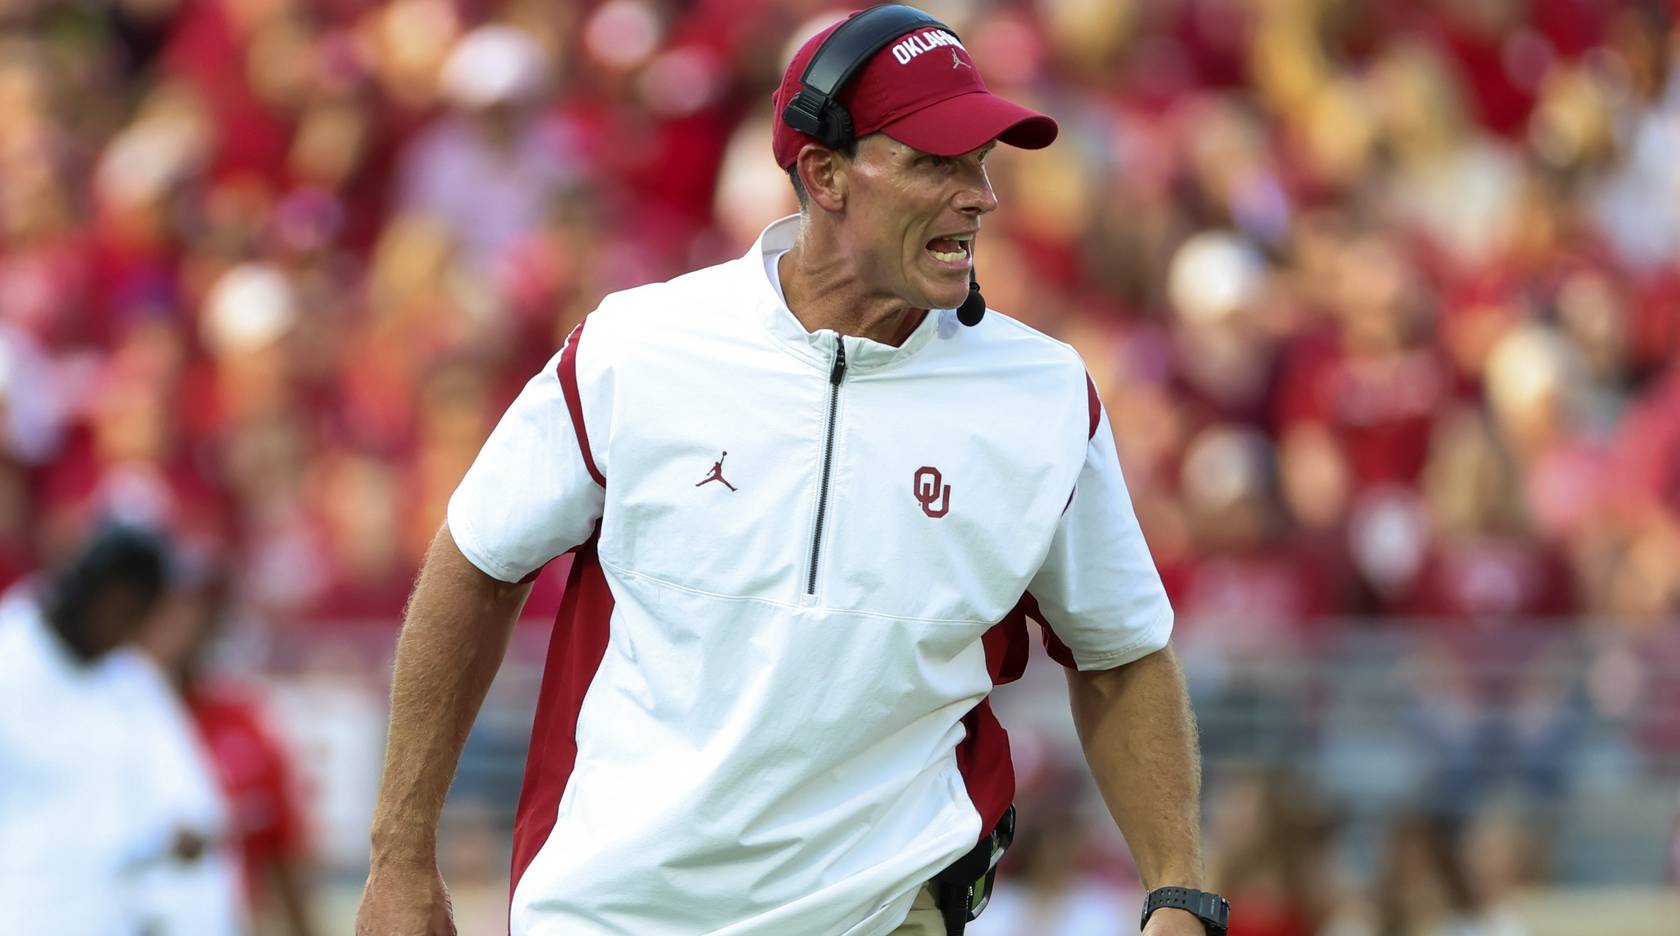 Brent Venables’s Six-Year Oklahoma Contract Is Fully Guaranteed, per Report